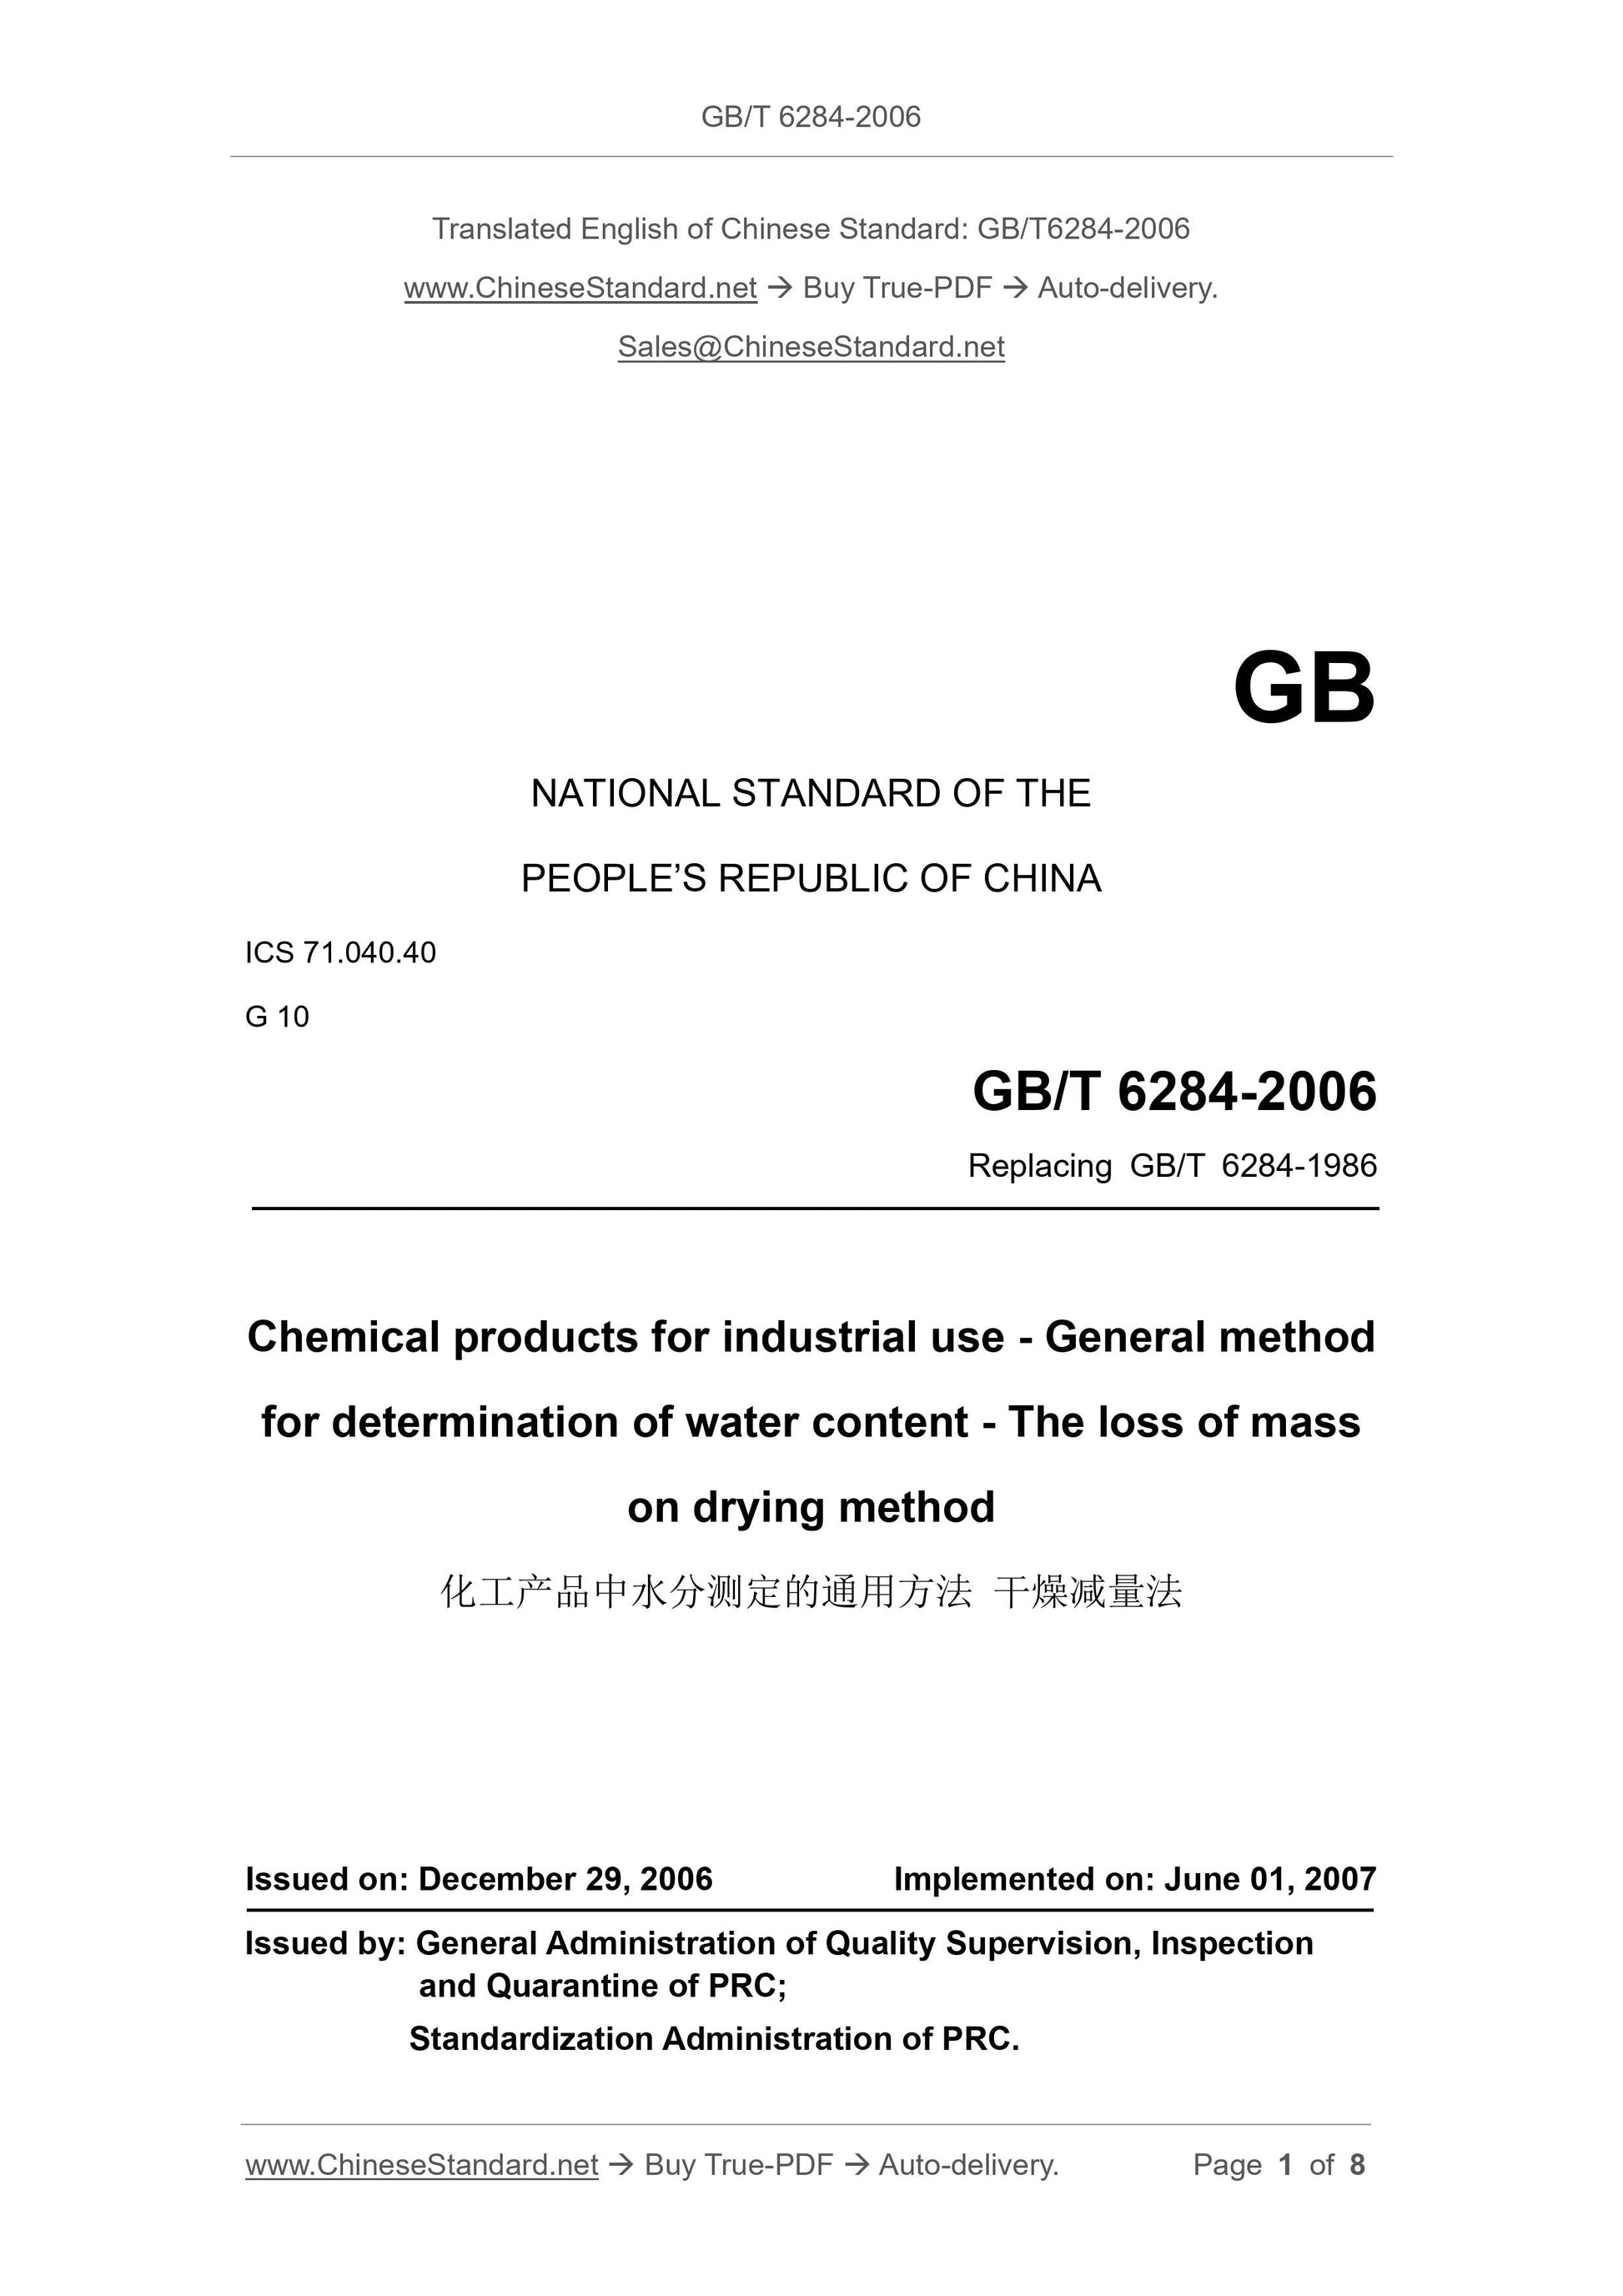 GB/T 6284-2006 Page 1